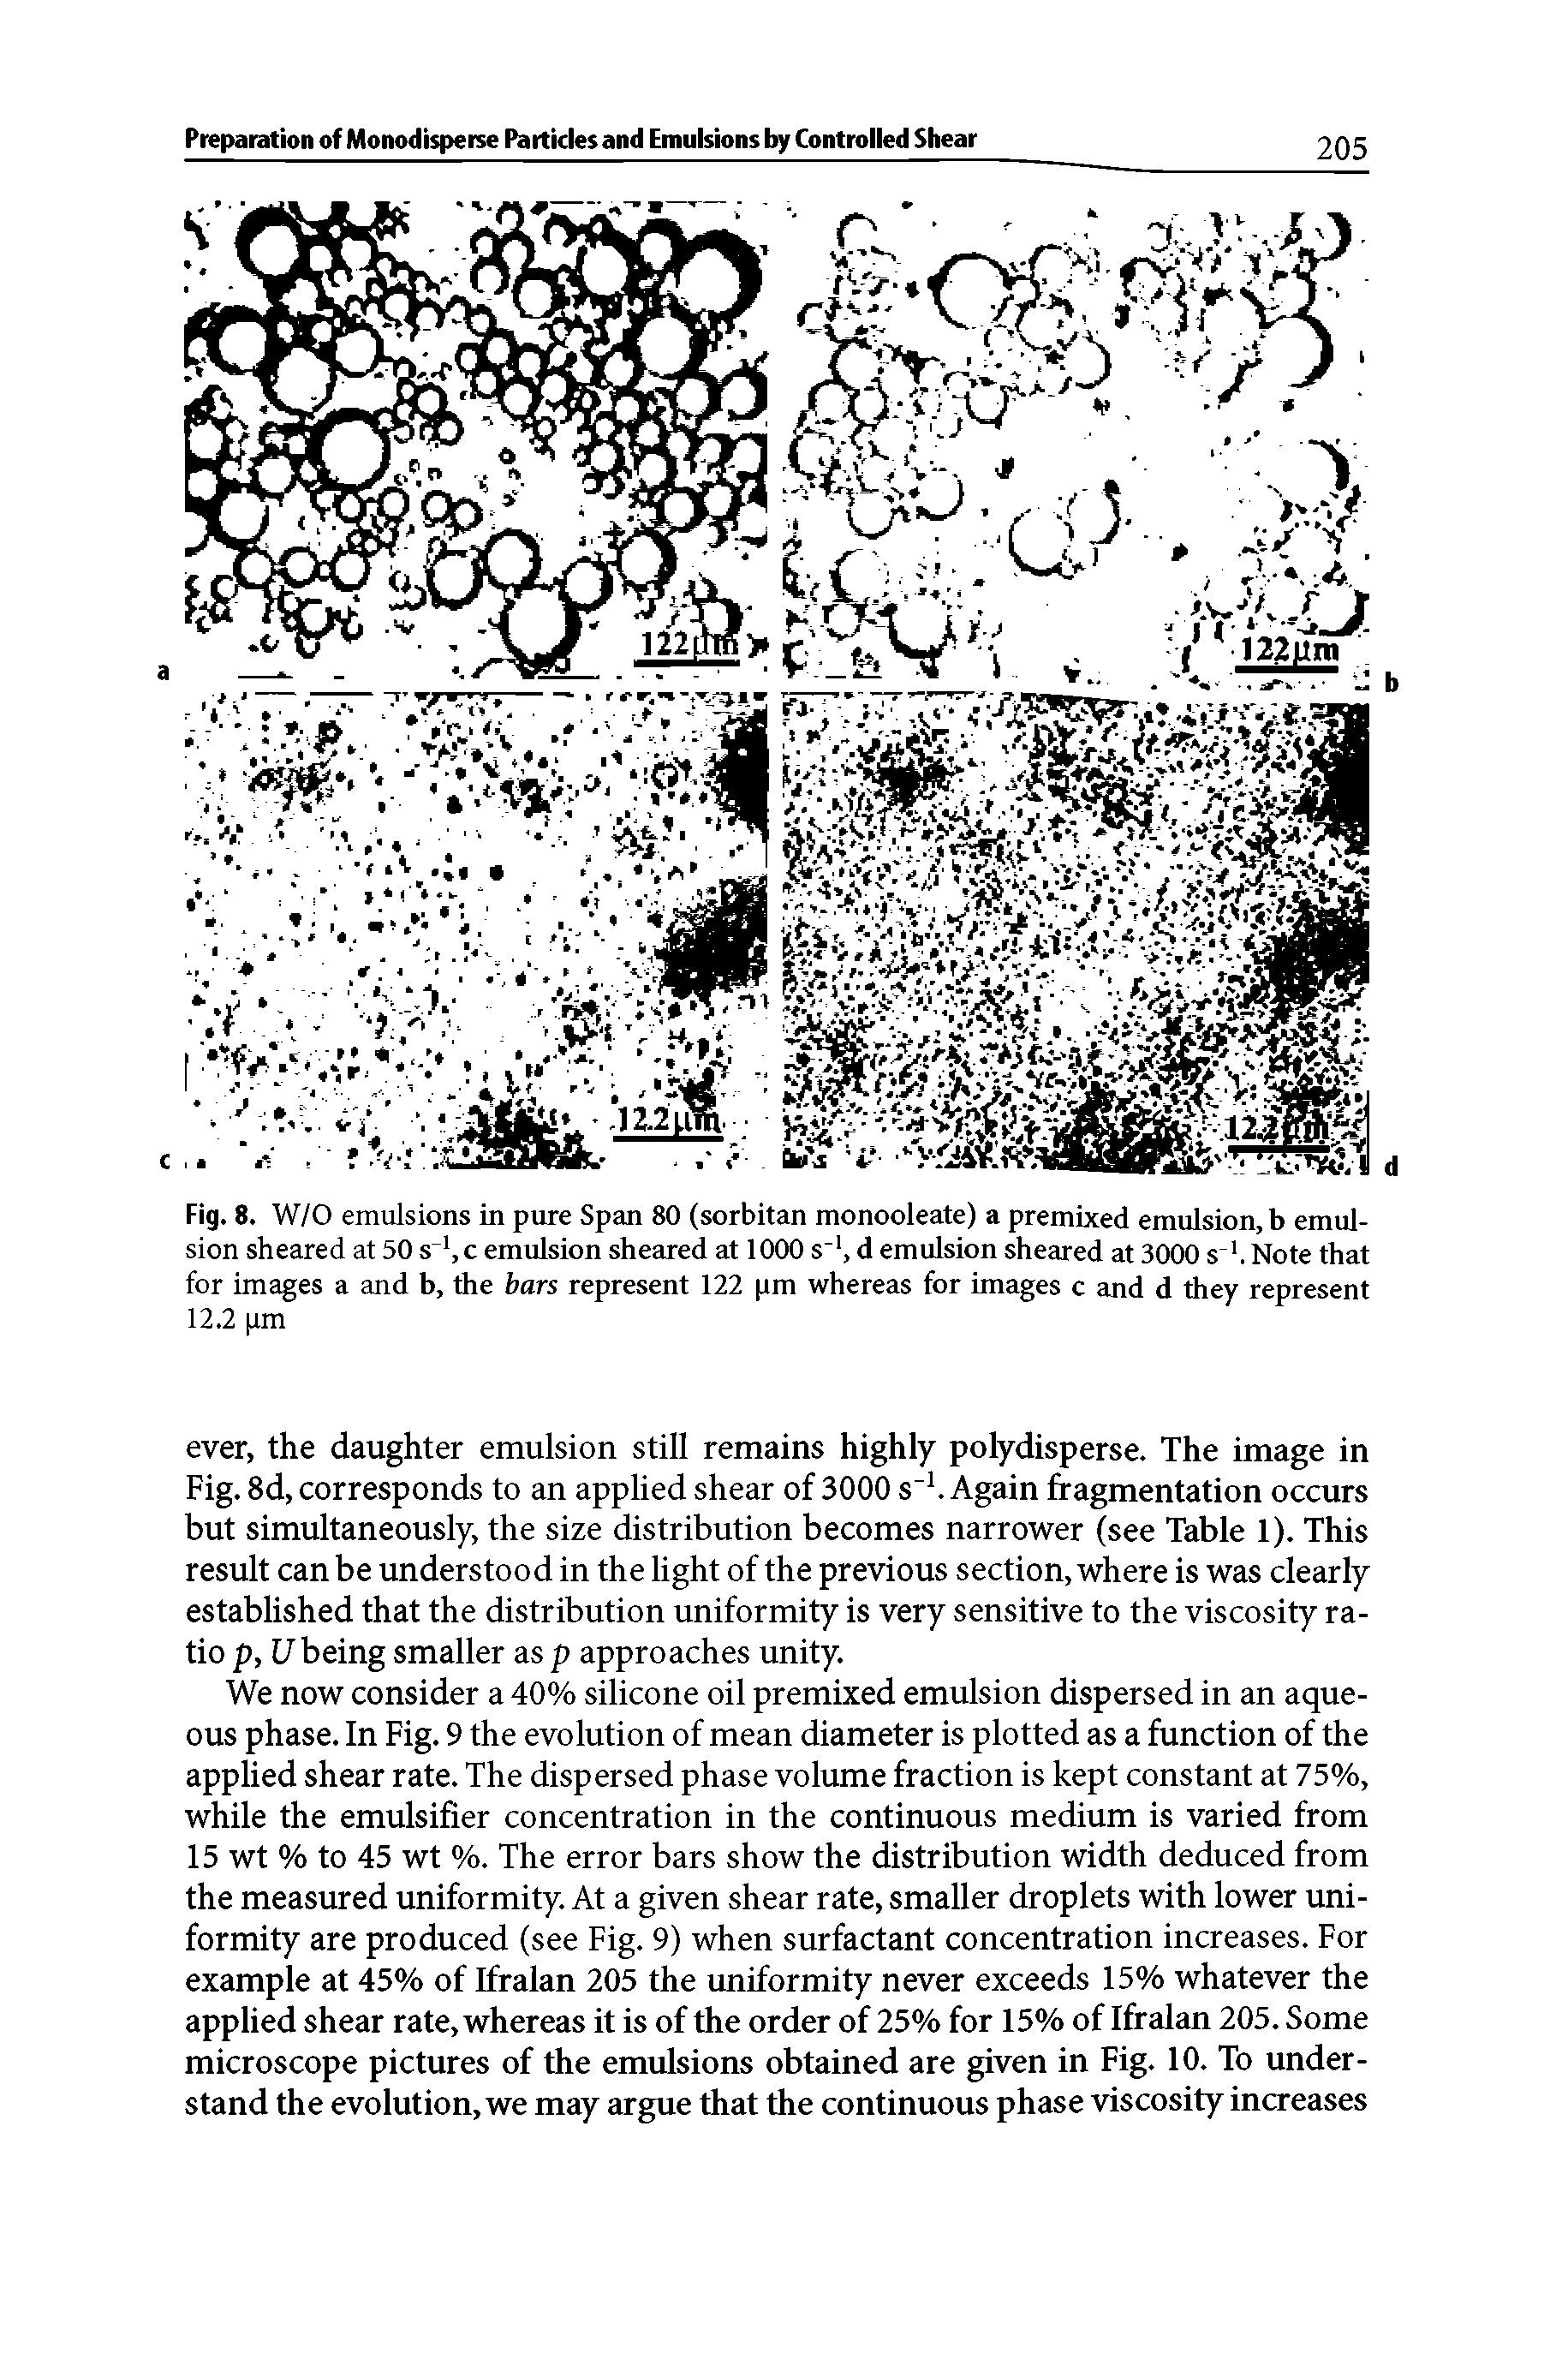 Fig. 8. W/O emulsions in pure Span 80 (sorbitan monooleate) a premixed emulsion, b emulsion sheared at 50 s c emulsion sheared at 1000 s 1, d emulsion sheared at 3000 s. Note that for images a and b, the bars represent 122 pm whereas for images c and d they represent 12.2 pm...